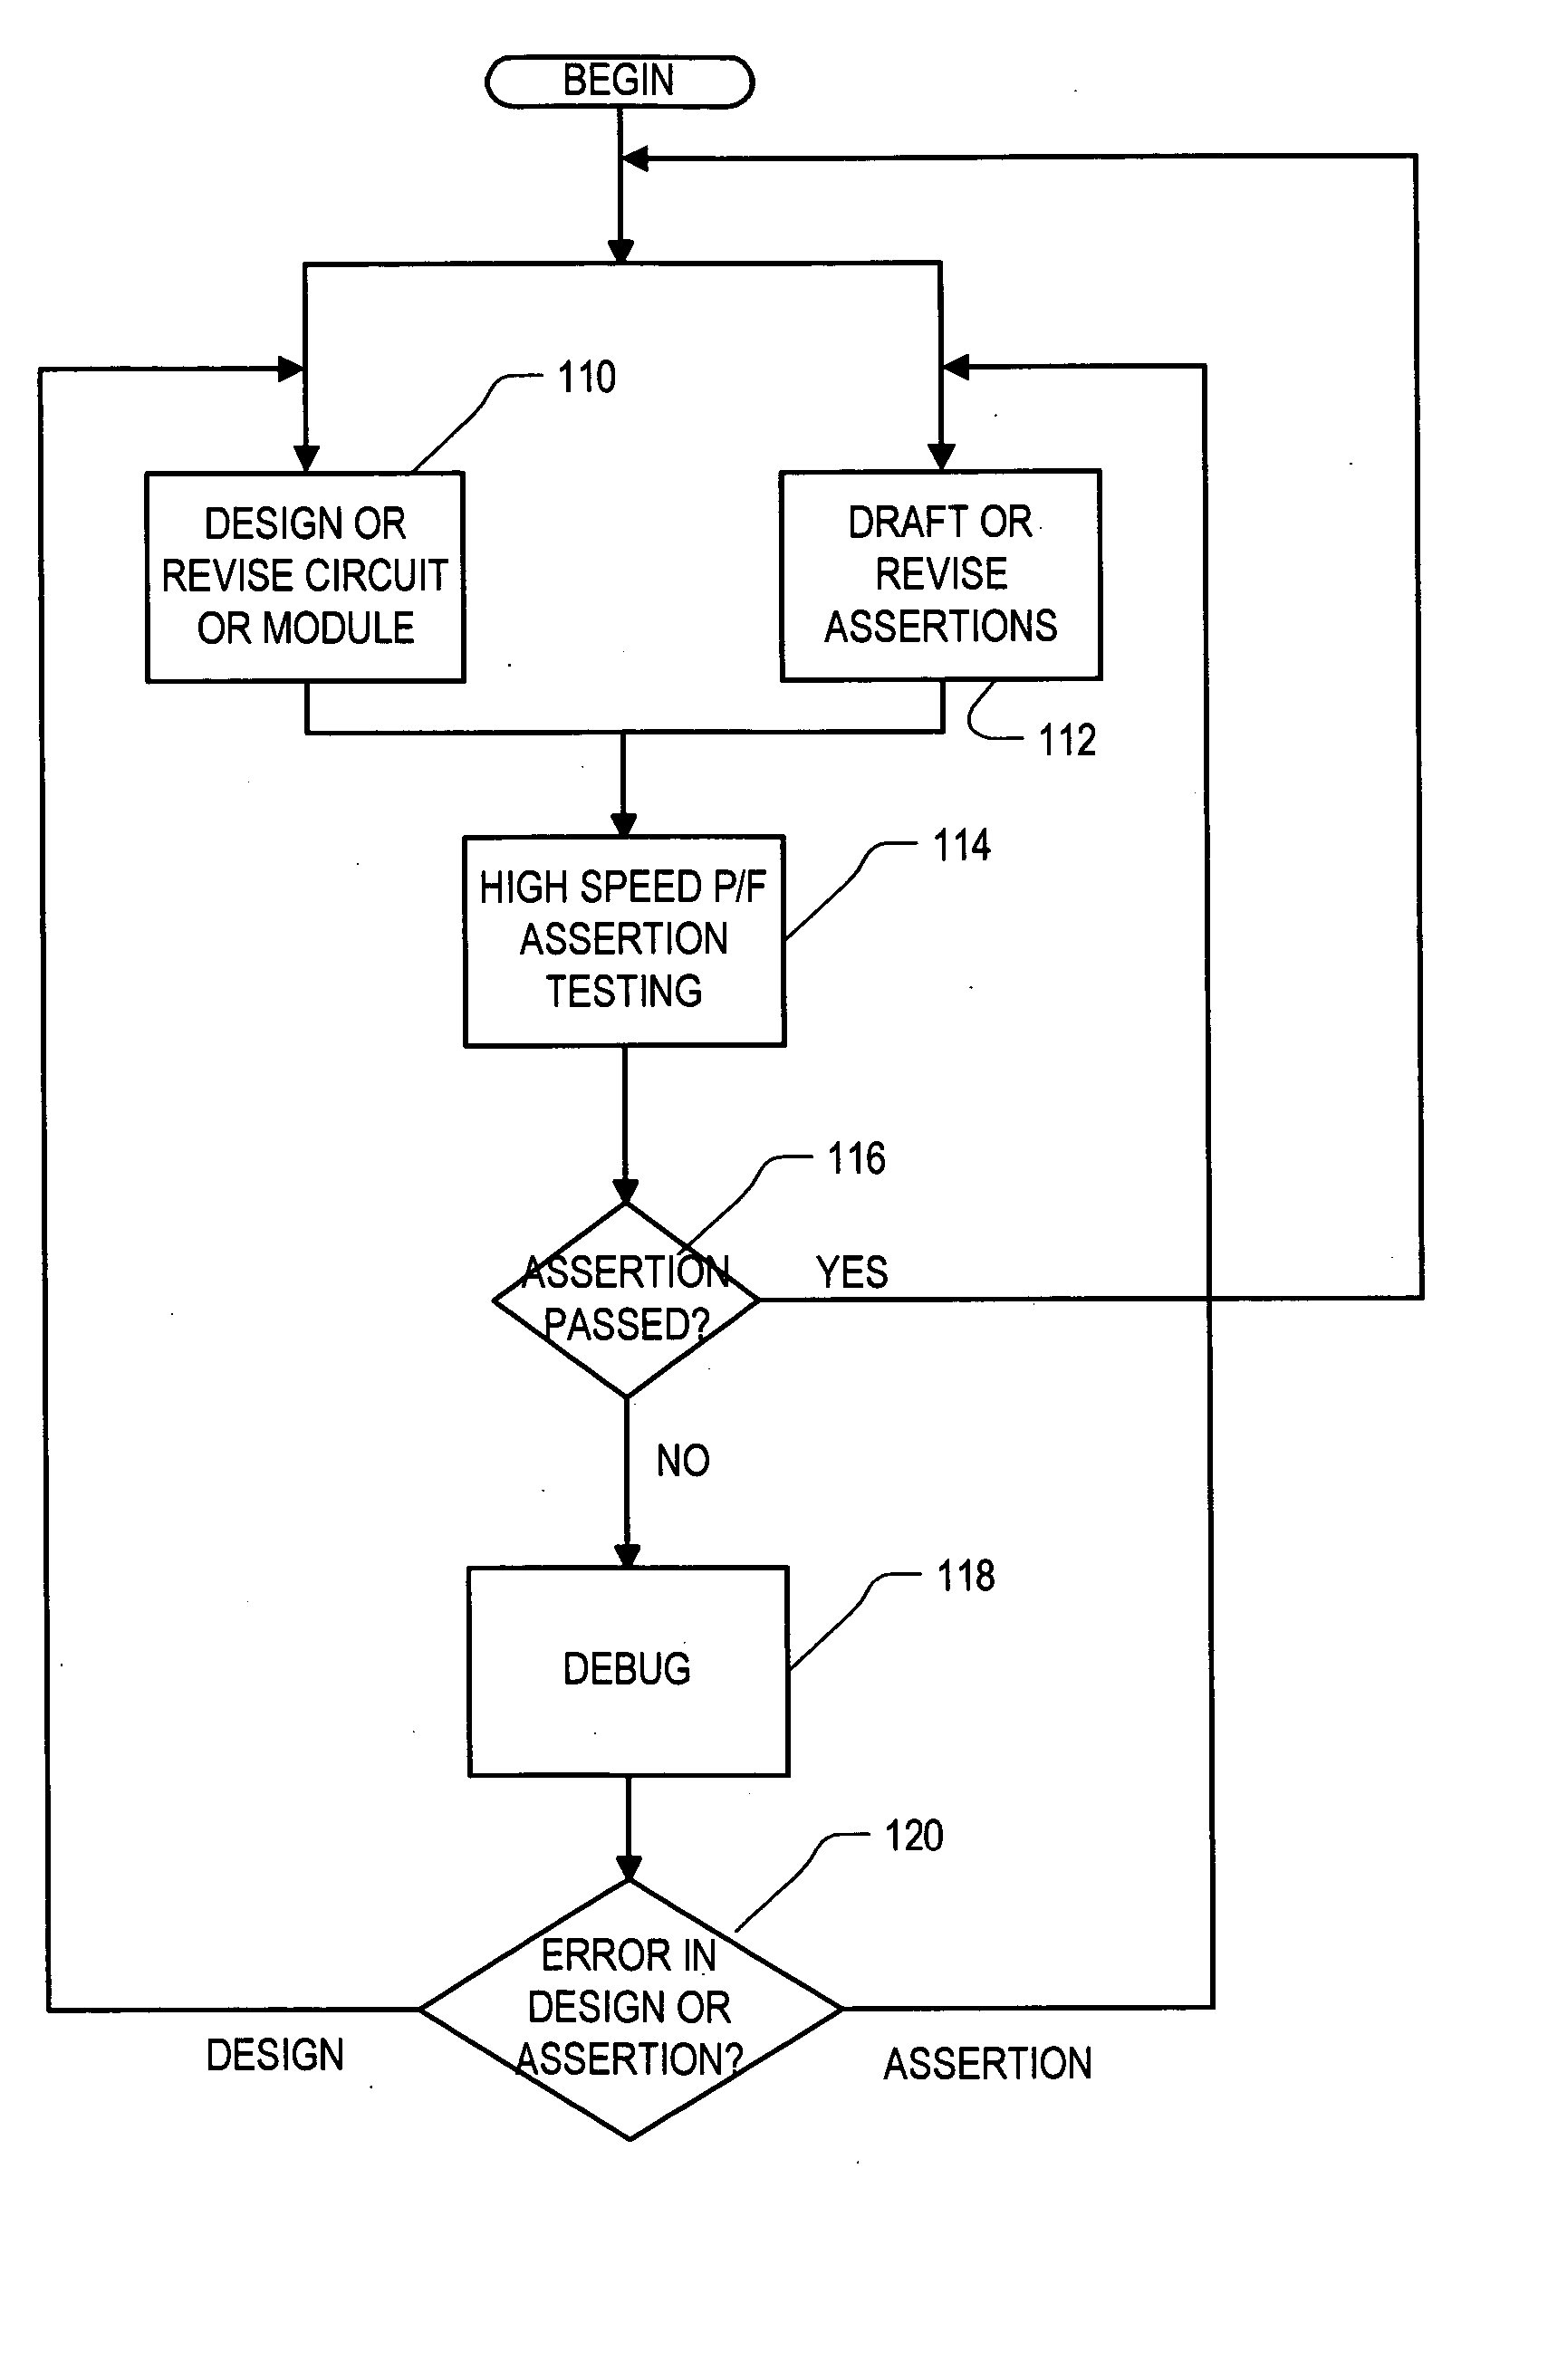 Method and apparatus for evaluating and debugging assertions